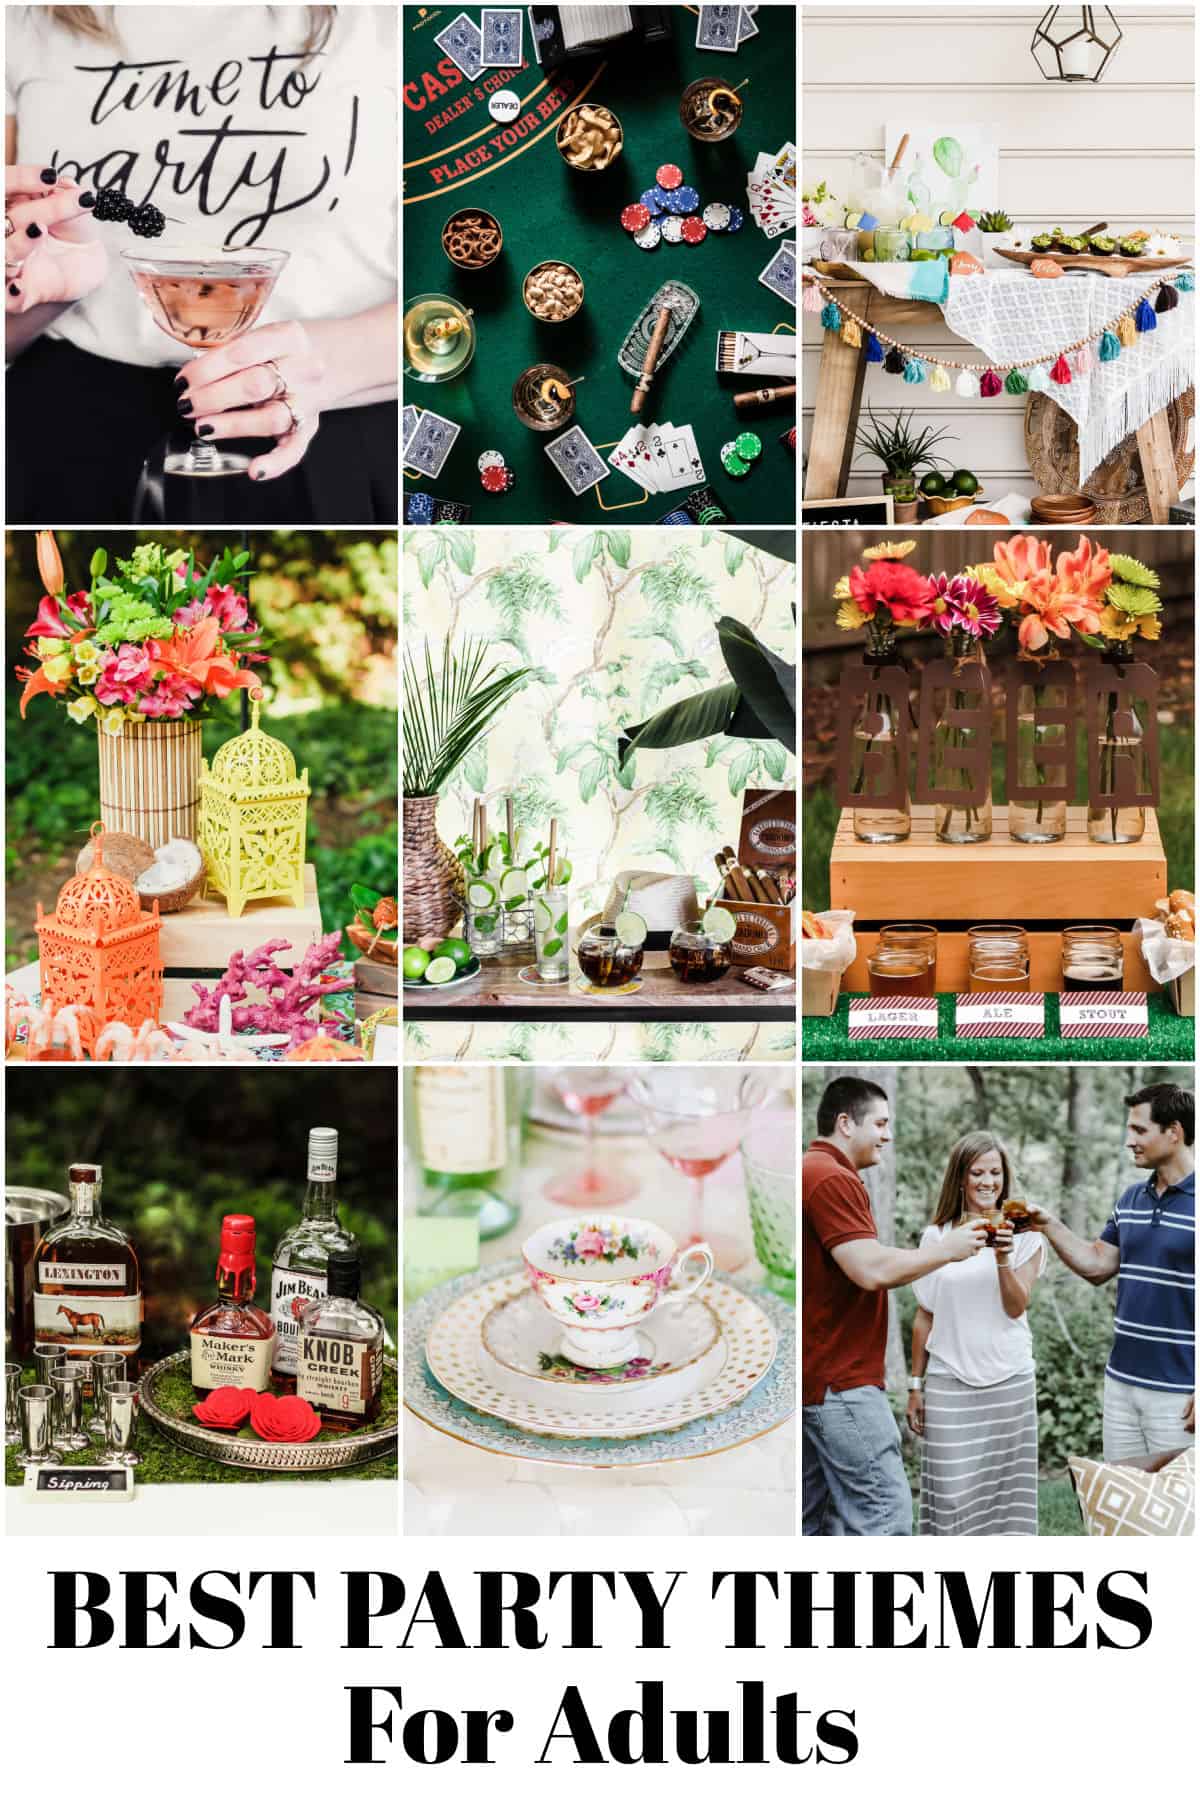 80 Best Party Themes For Adults - Celebrations at Home